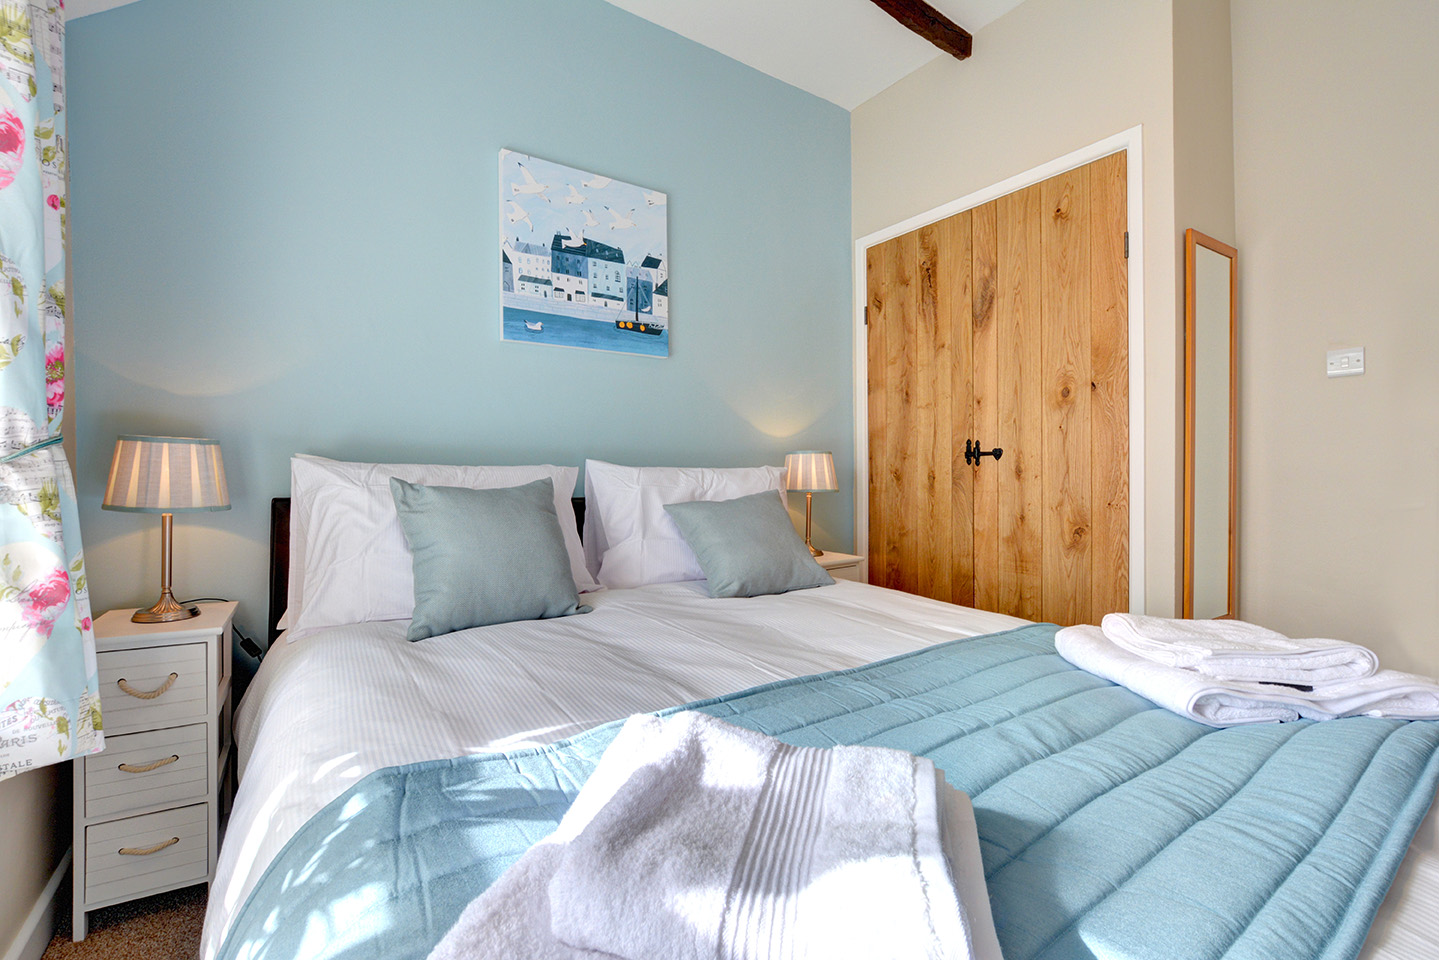 The master bedroom of Otterbridge luxury self catering converted barn holiday cottage at Penrose Burden in North Cornwall01.jpg